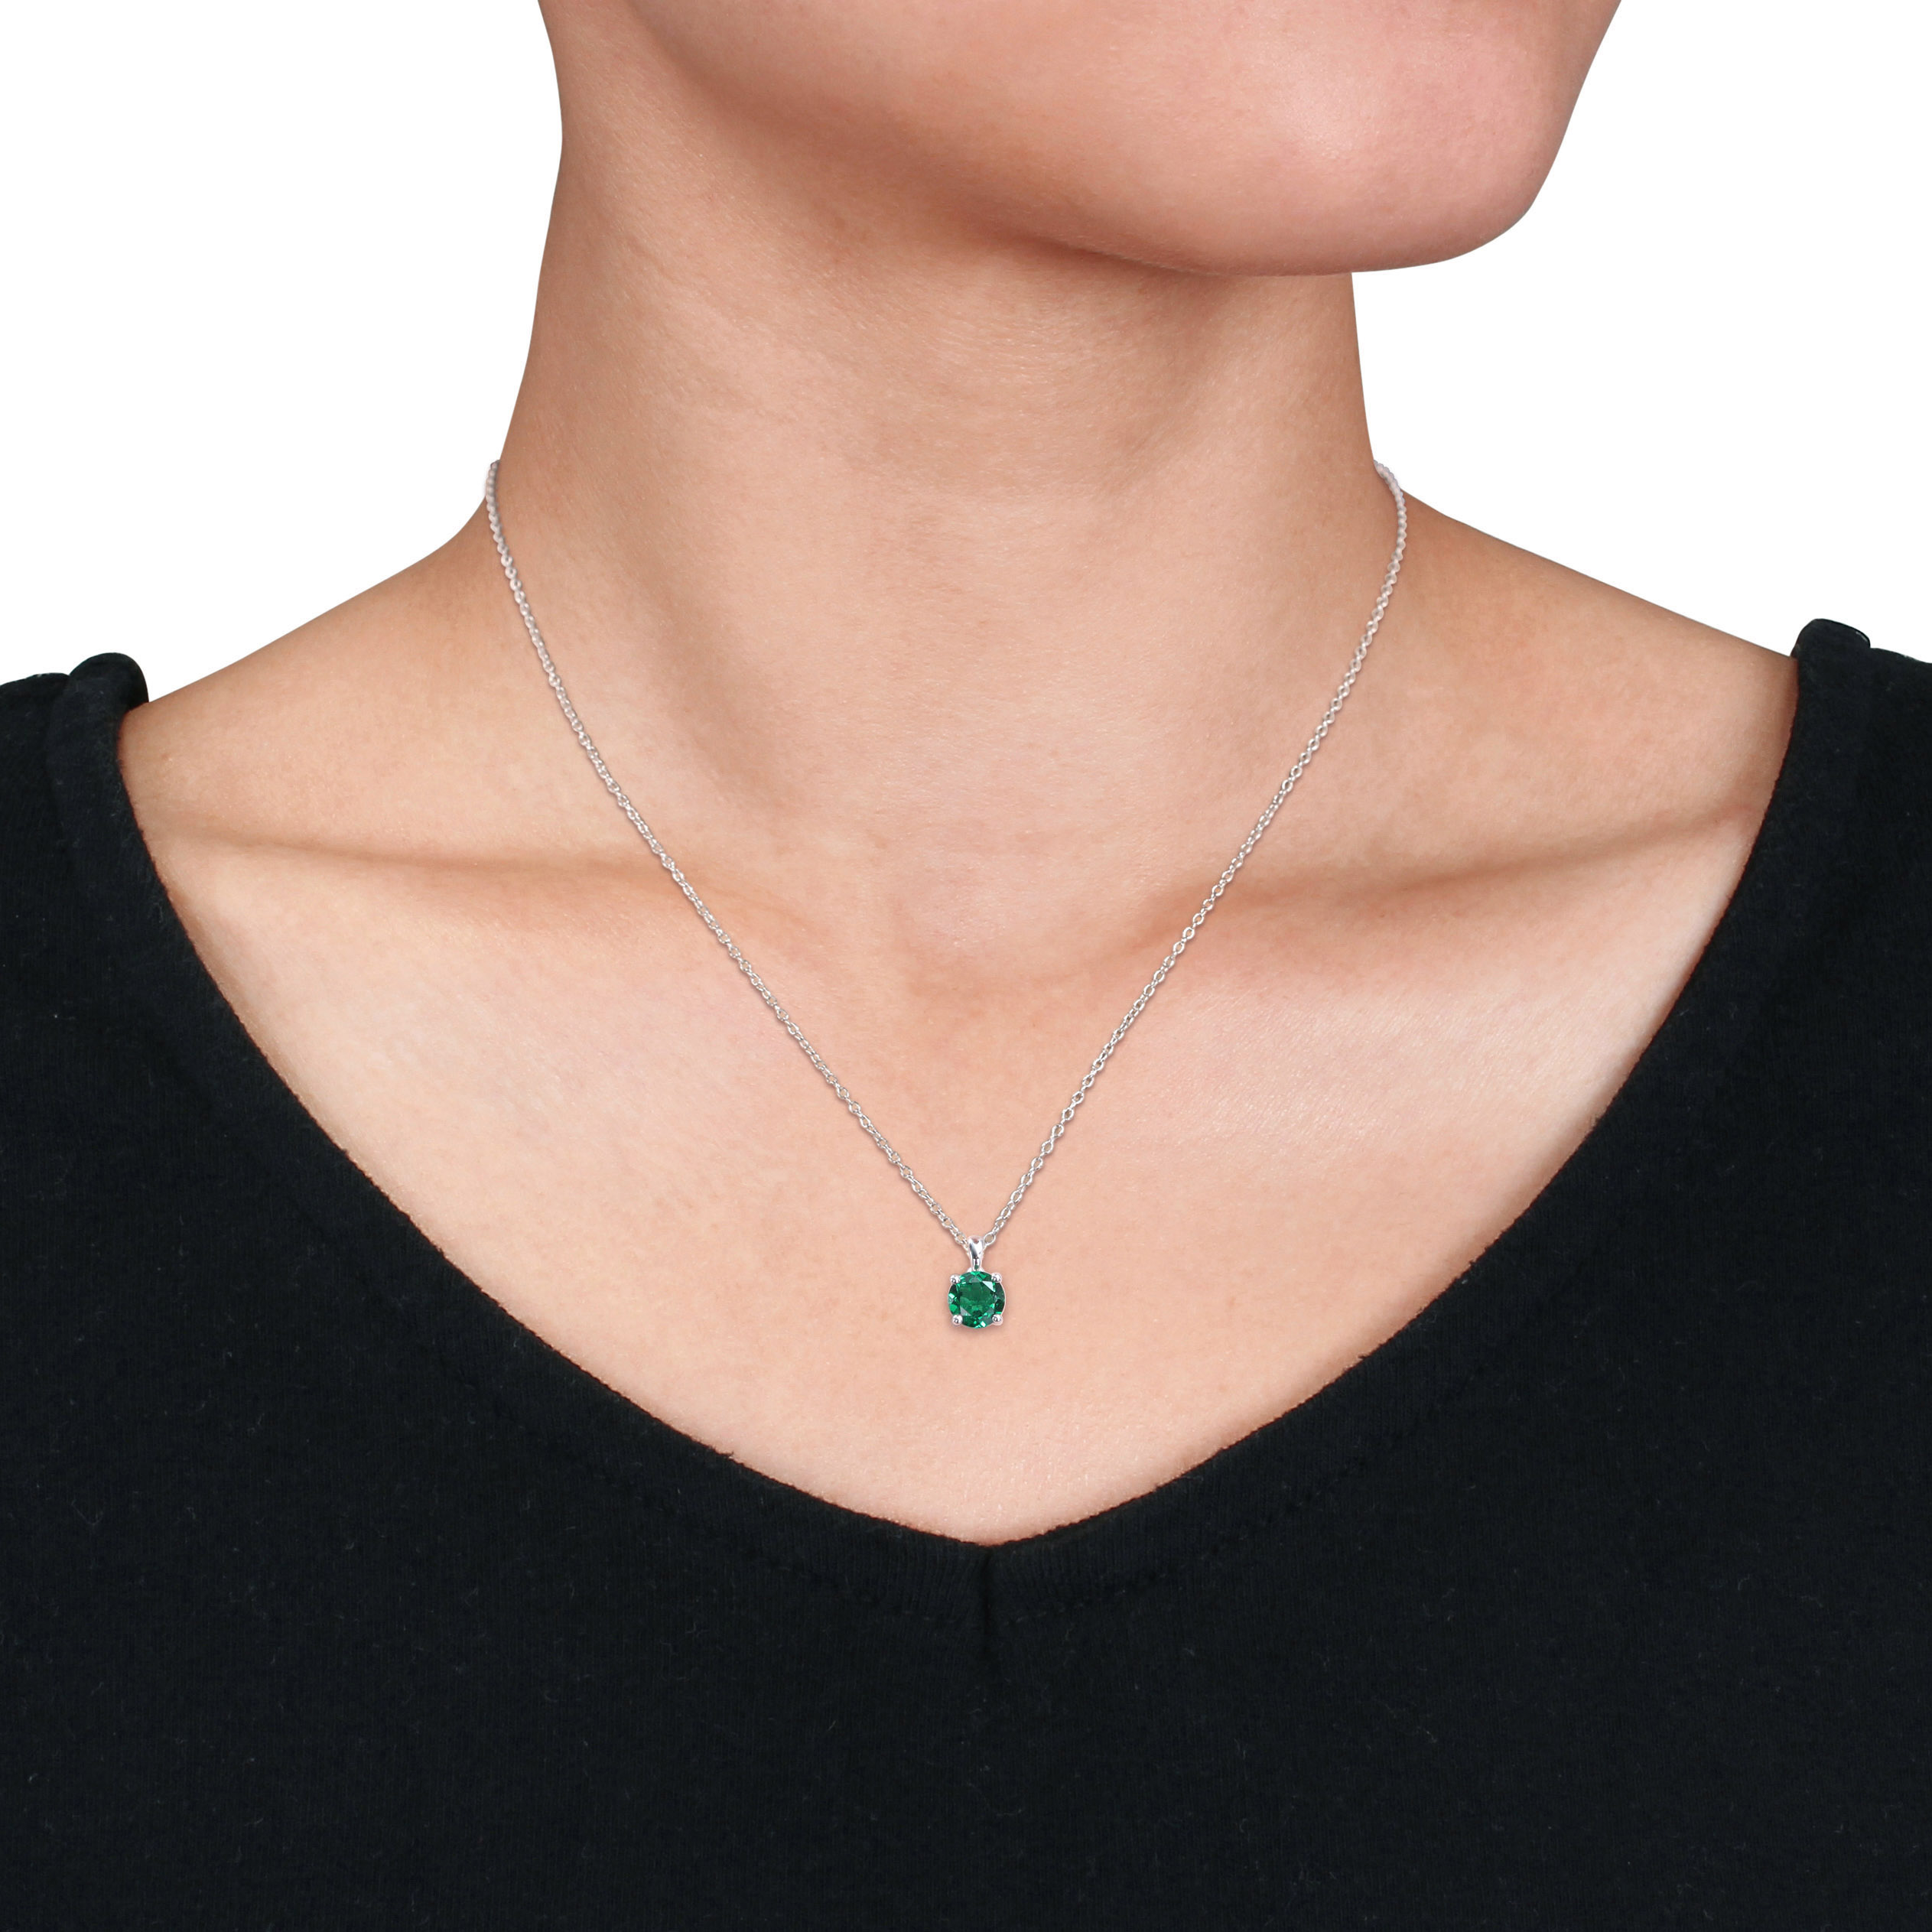 1 1/7 CT TGW Created Emerald Solitaire Pendant with Chain in Sterling Silver